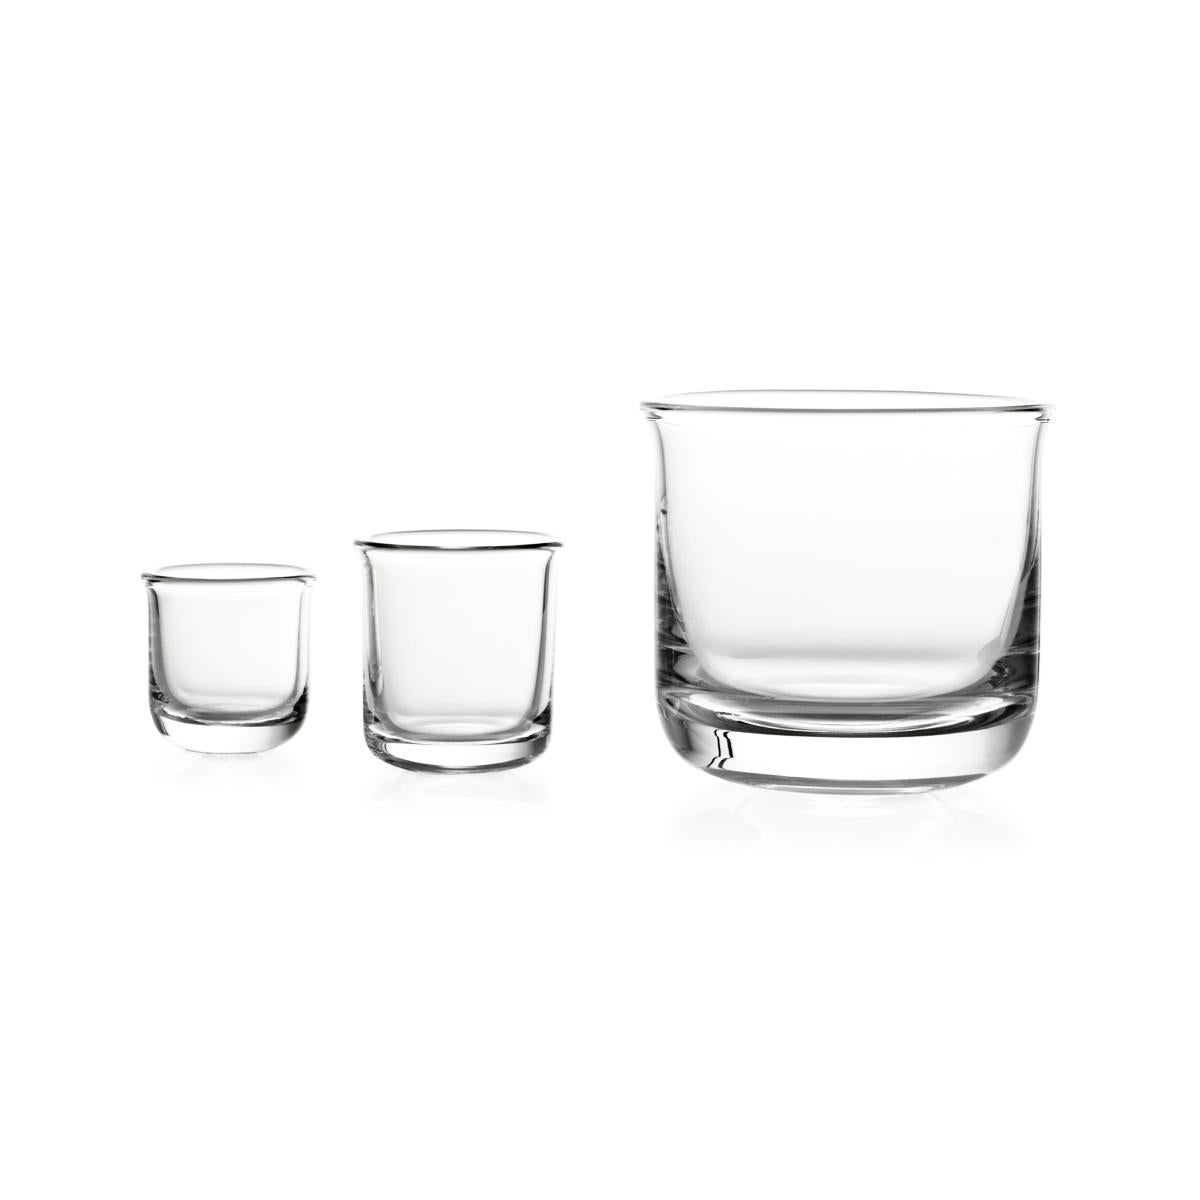 Whisky glass in blown in a mold glass. Aldo collection is a family of glassware for tasting liqueurs. The handy and slightly flared shape allows to perceive the aromas in the best way, so the moment of sipping a quality distillate becomes even more